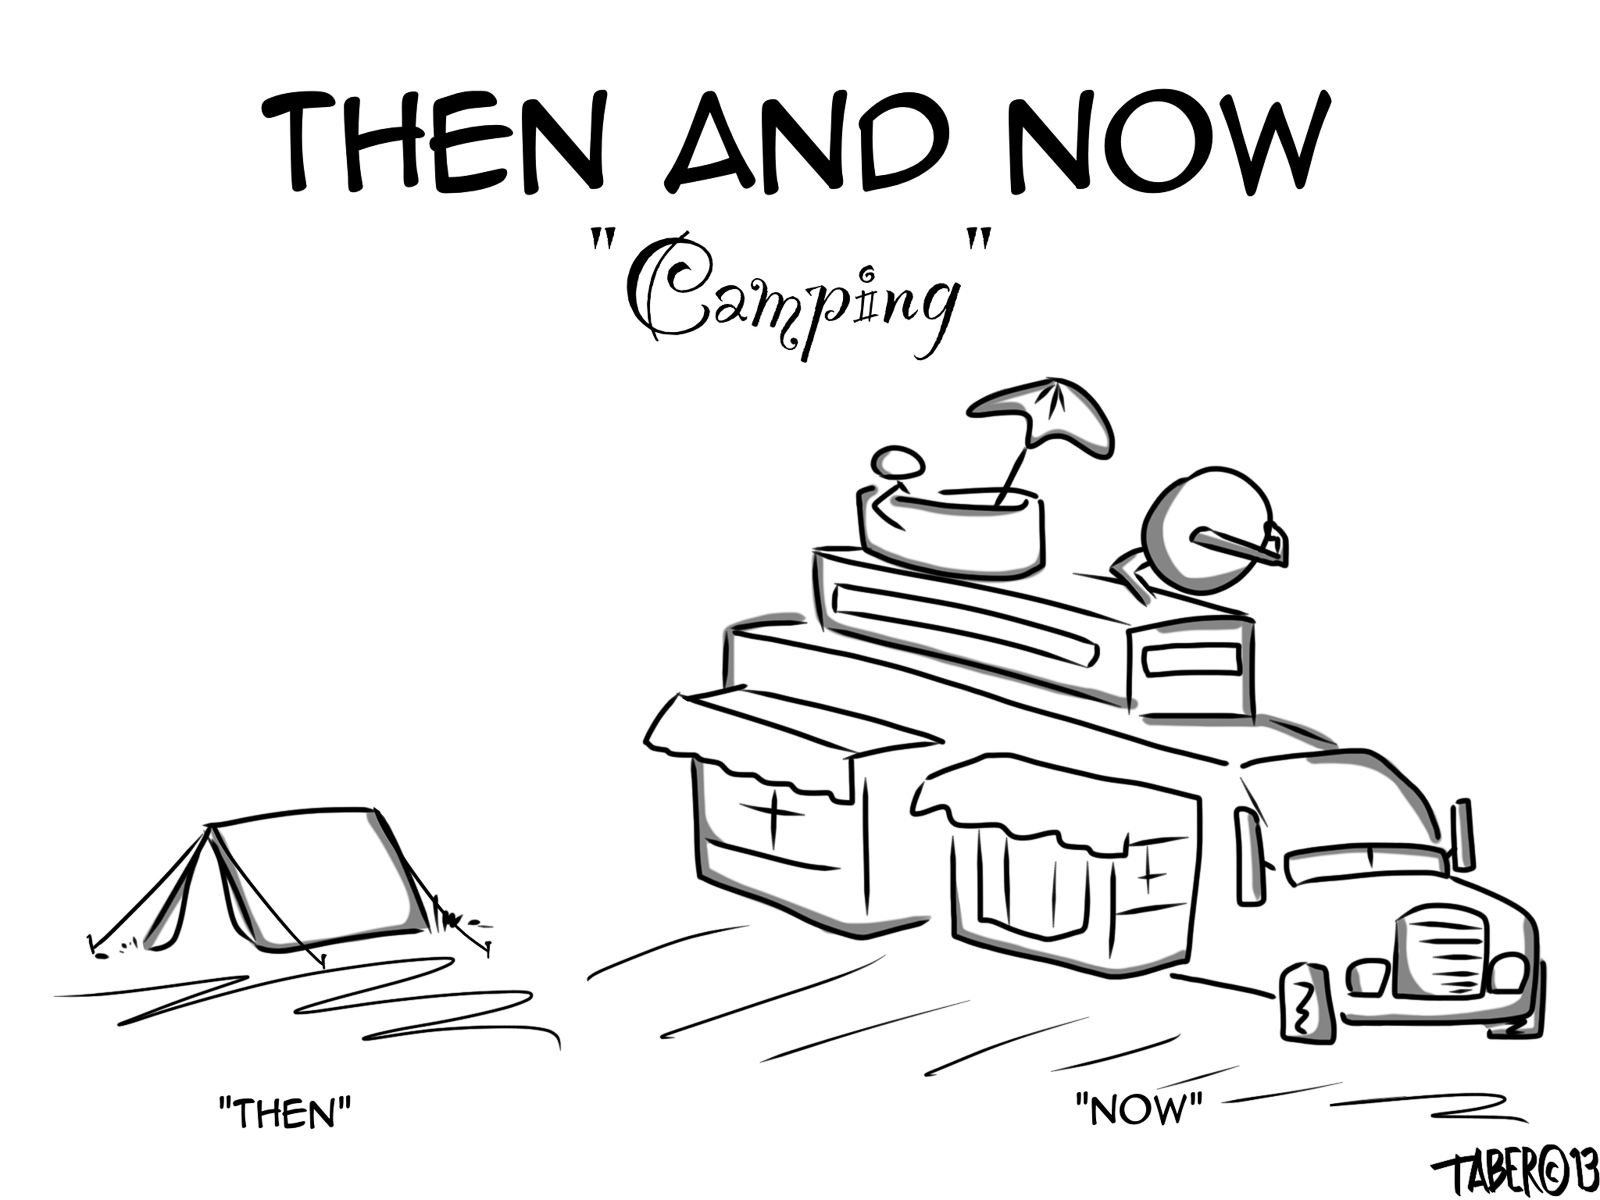 Camping: Then and Now Cartoon | The Cartoons of Forest Taber